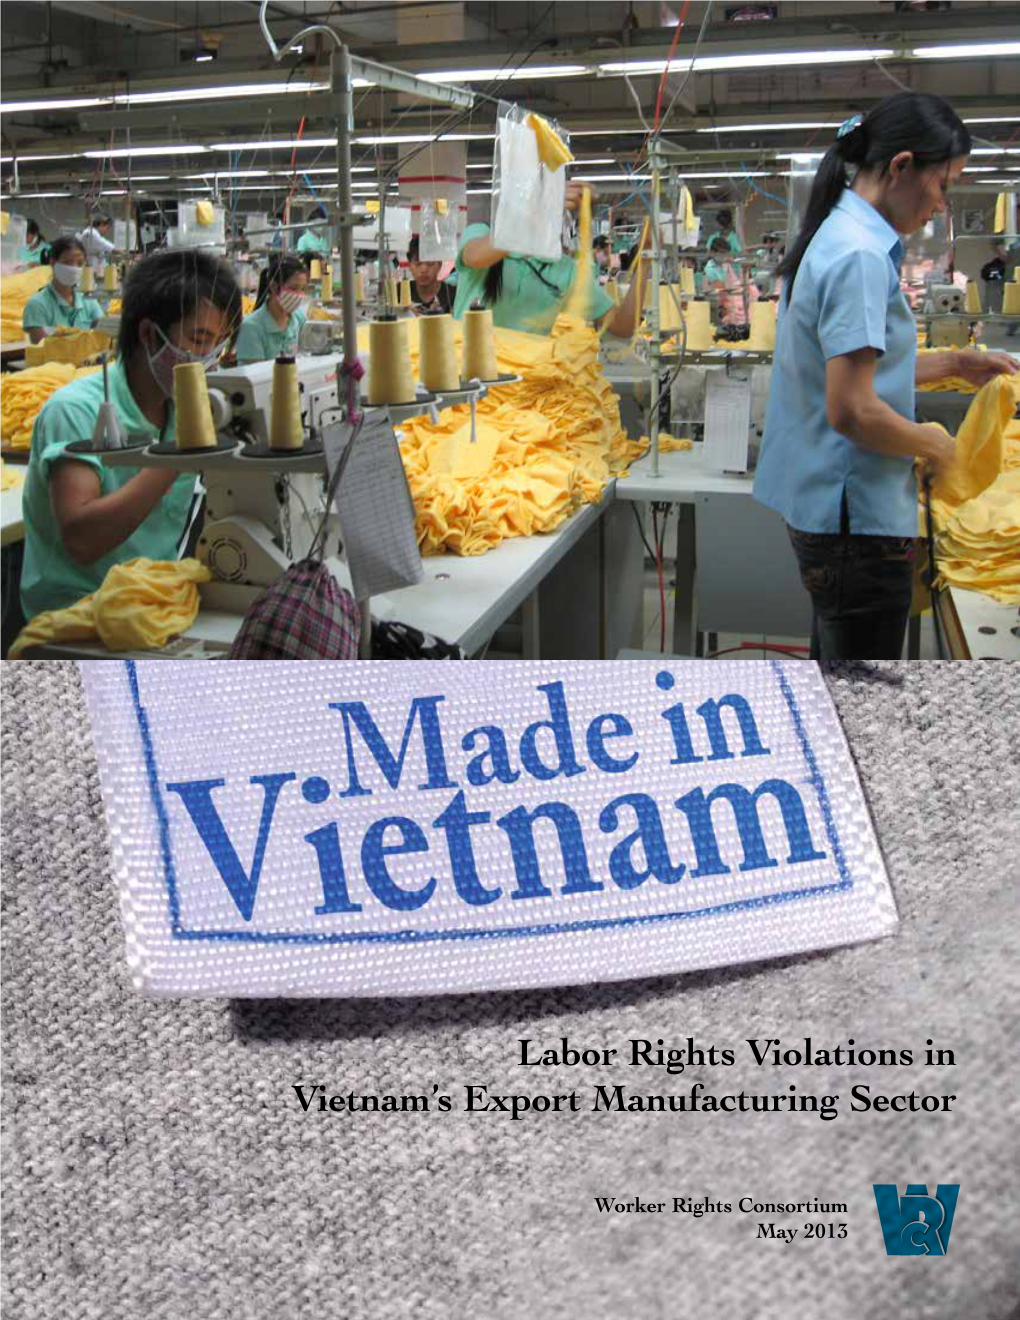 Labor Rights Violations in Vietnam's Export Manufacturing Sector